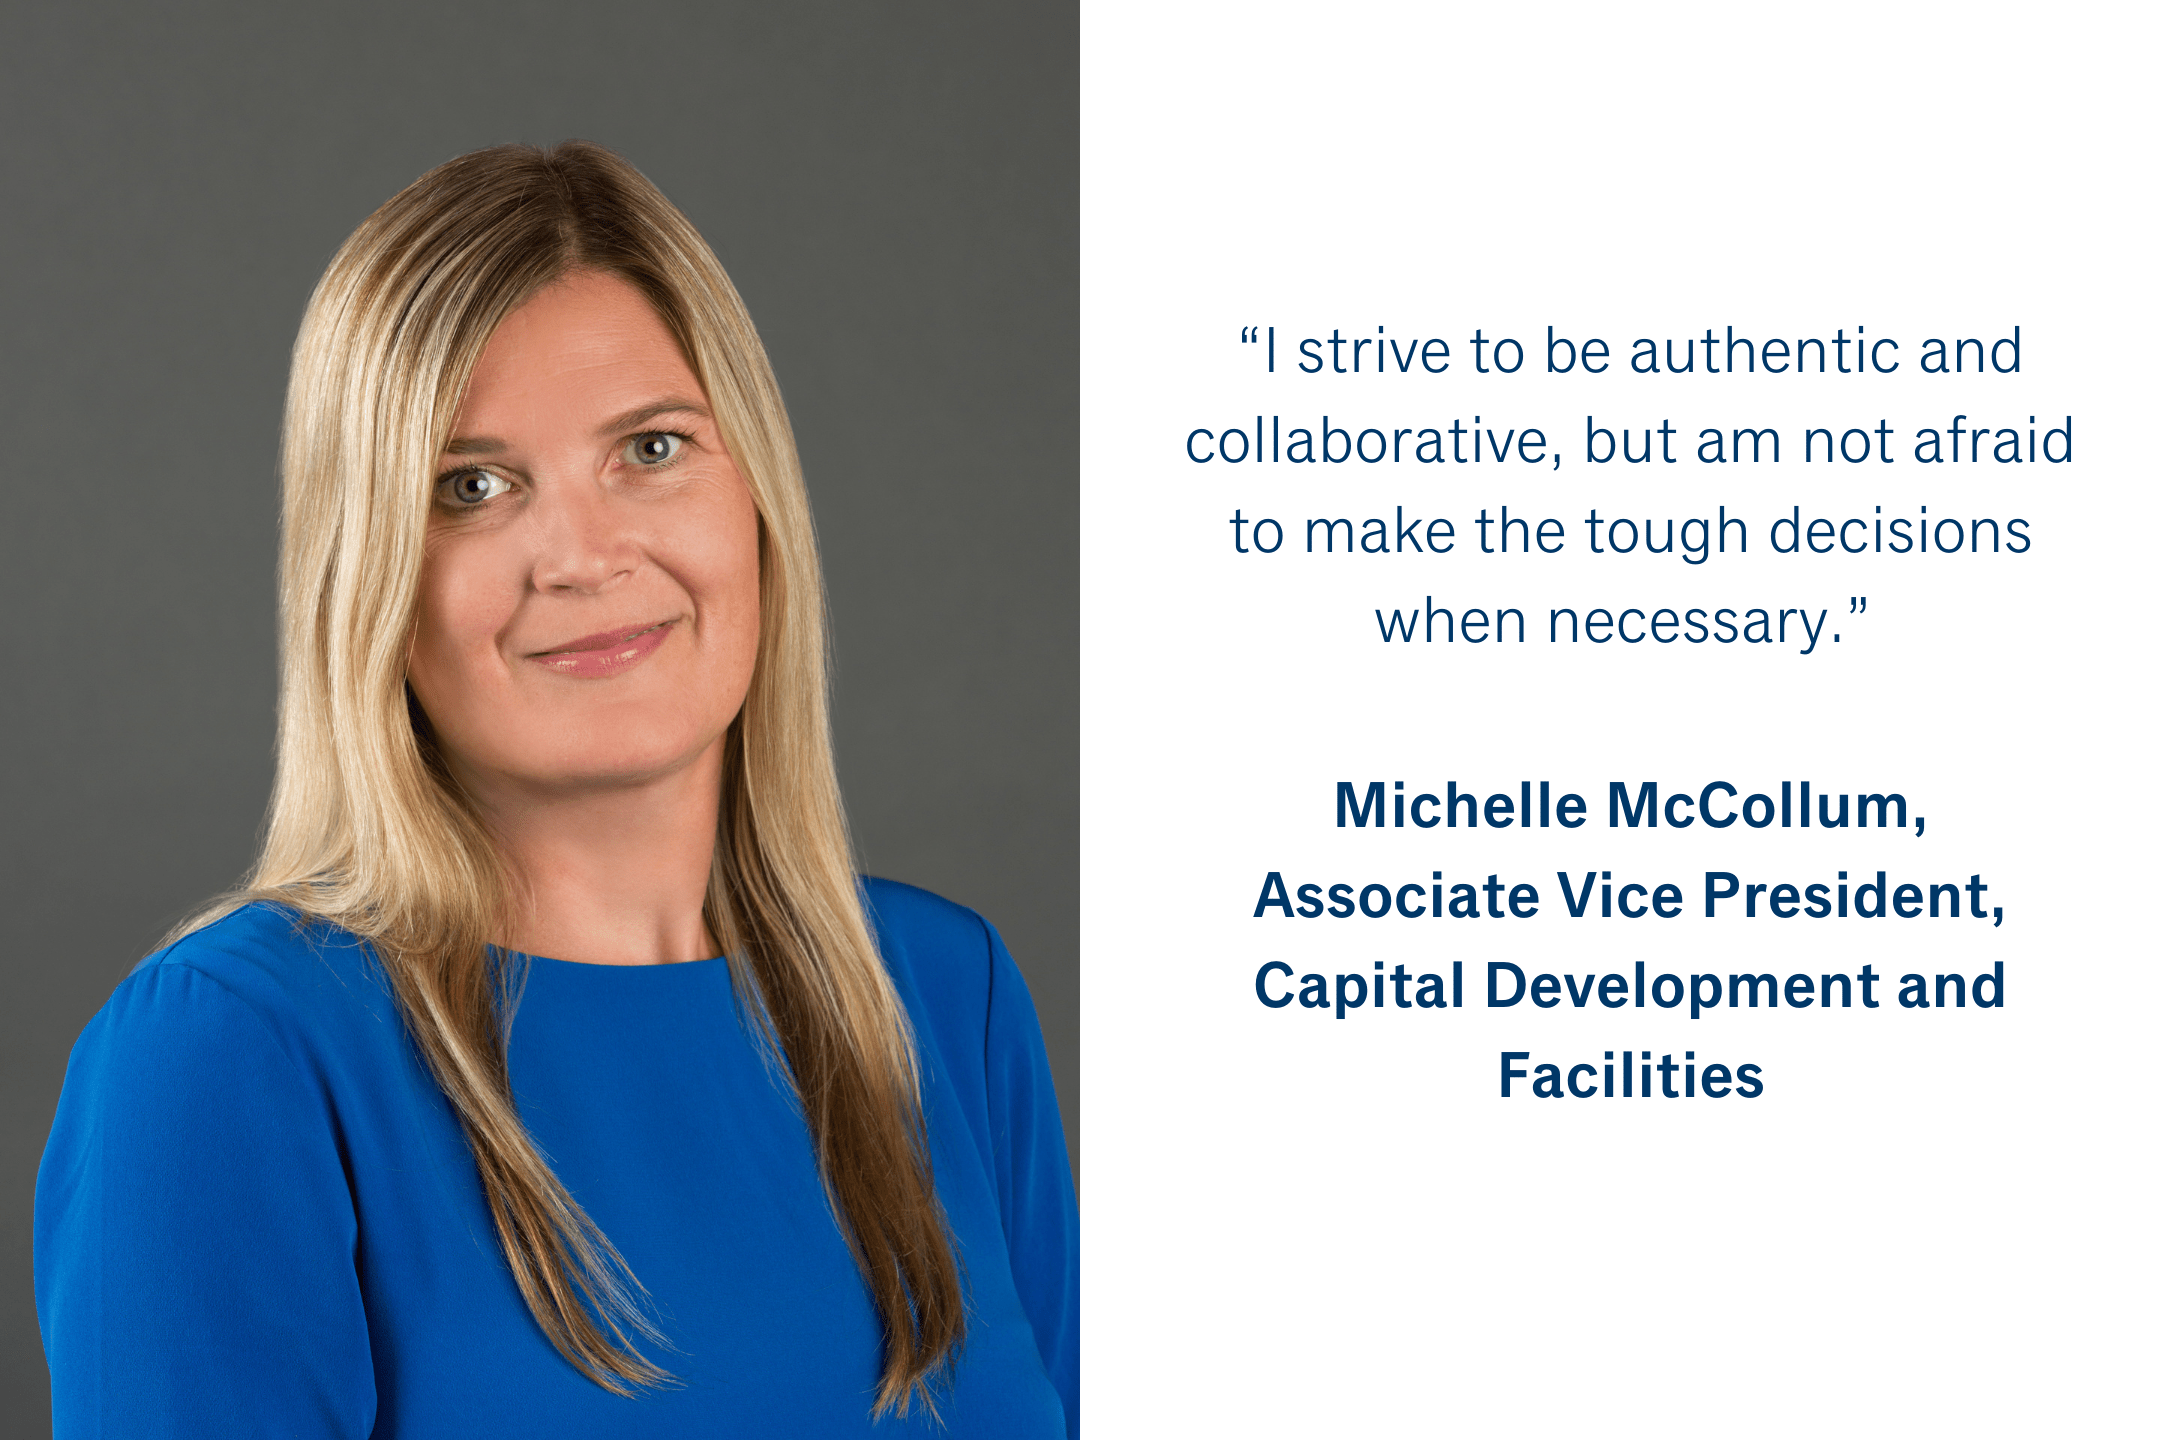 “I strive to be authentic and collaborative, but am not afraid to make the tough decisions when necessary.”  Michelle McCollum, Associate Vice President, Capital Development and Facilities